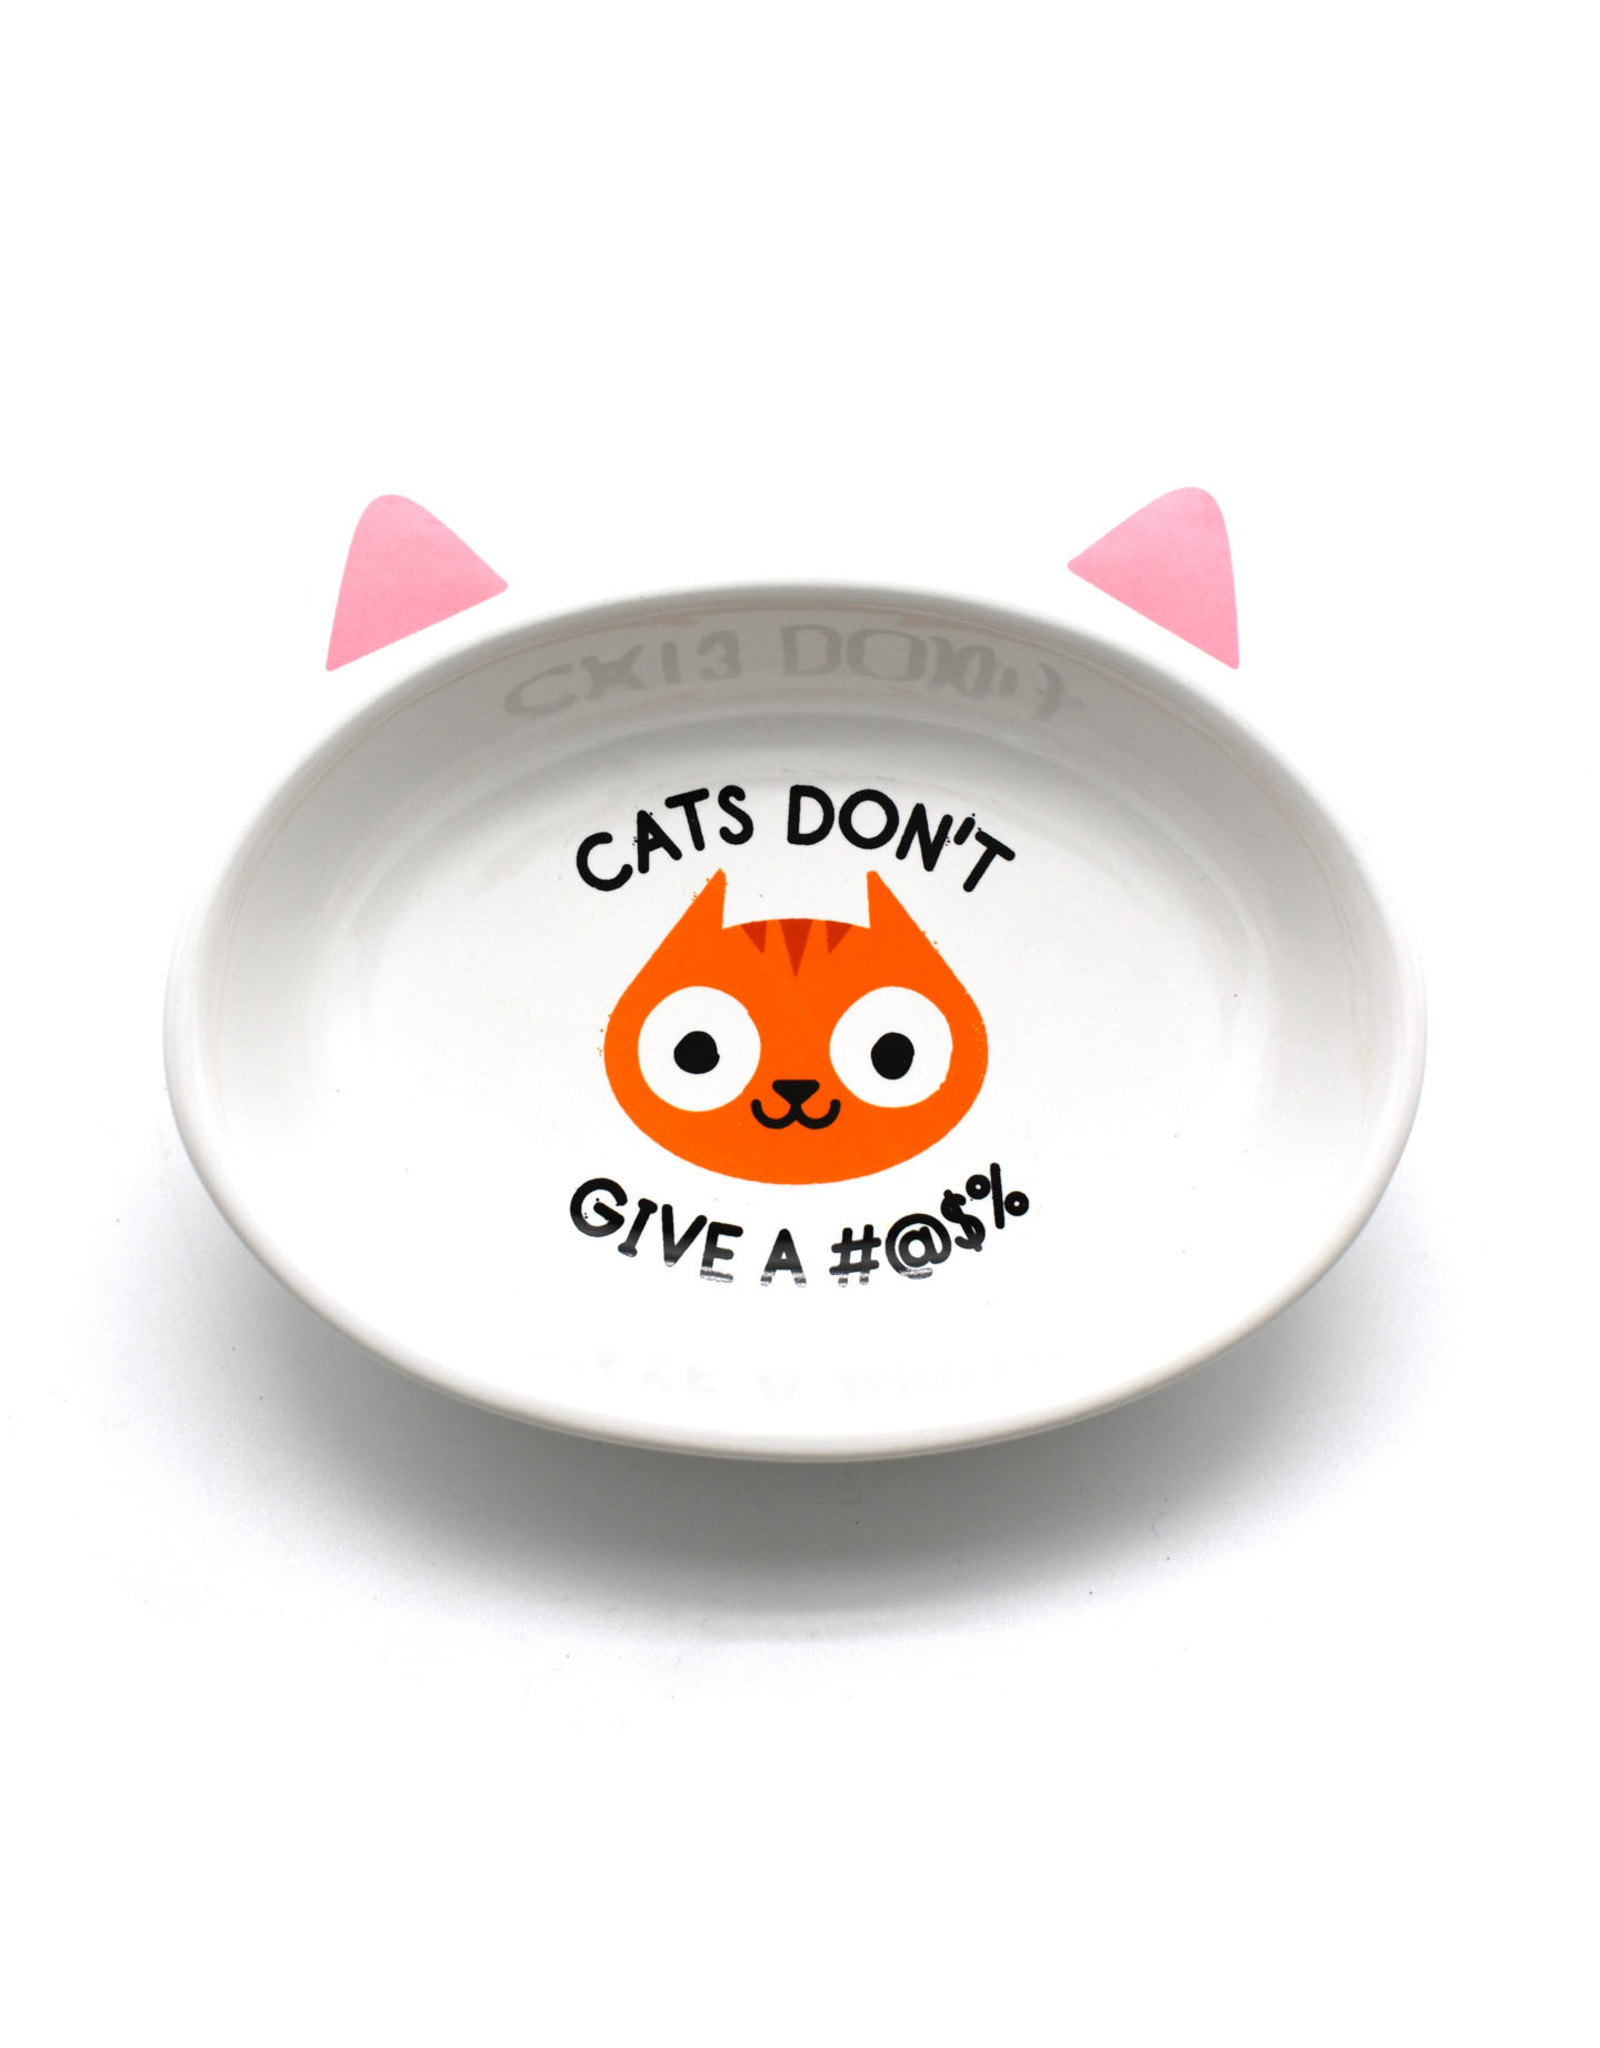 Cat's Don't Give A #$@!!! Ceramic Cat Dish